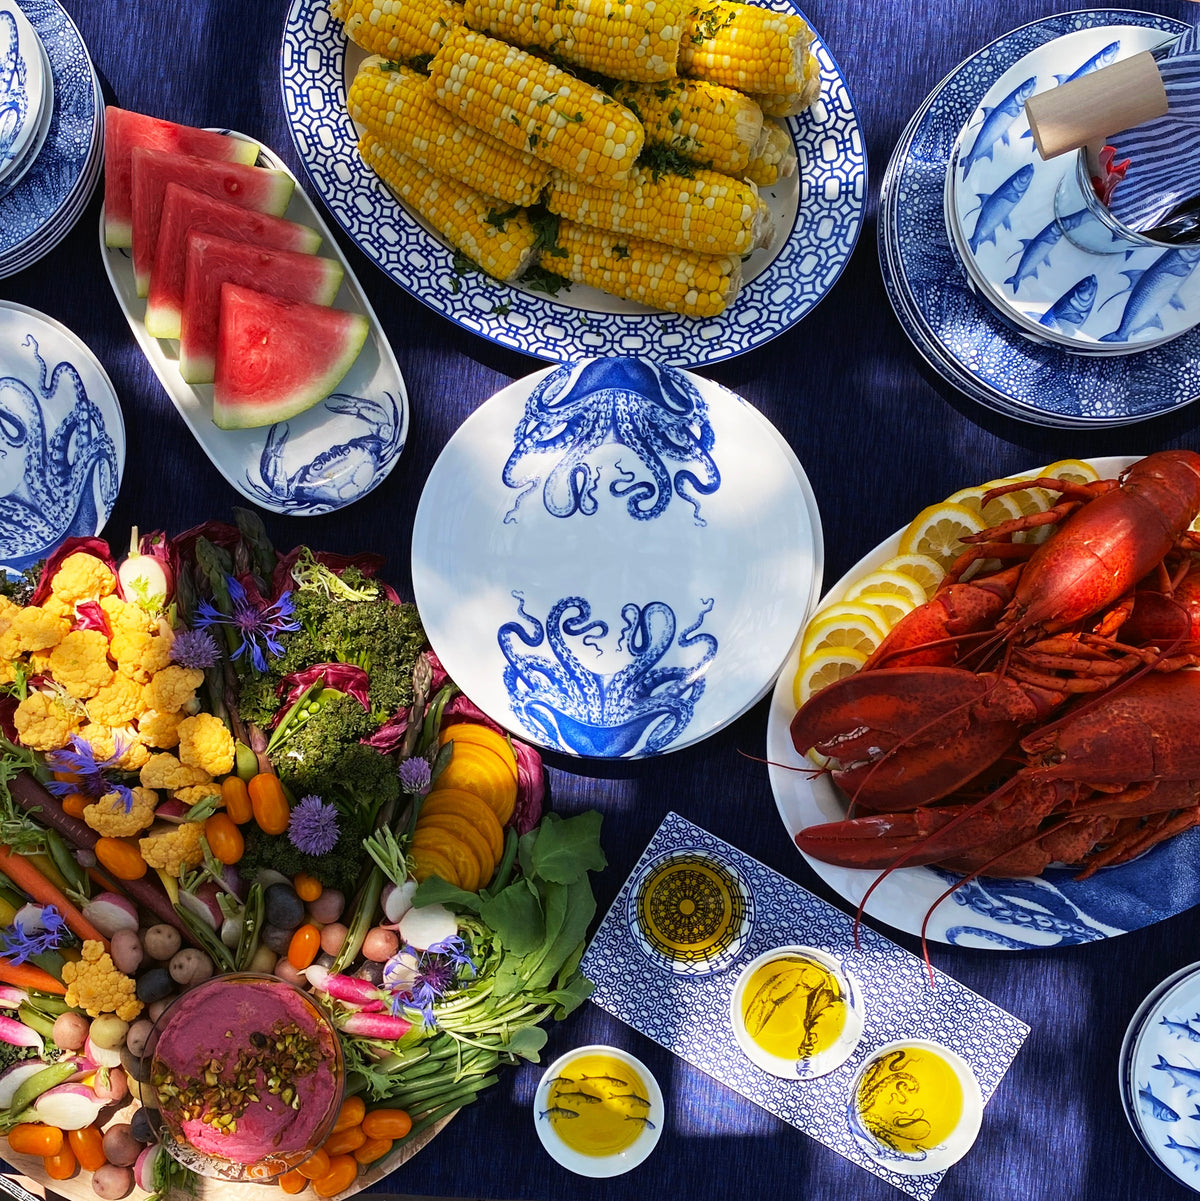 A contemporary blue and white Newport Garden Gate Oval Rimmed Platter table setting featuring a lobster, corn, and watermelon by Caskata Artisanal Home.